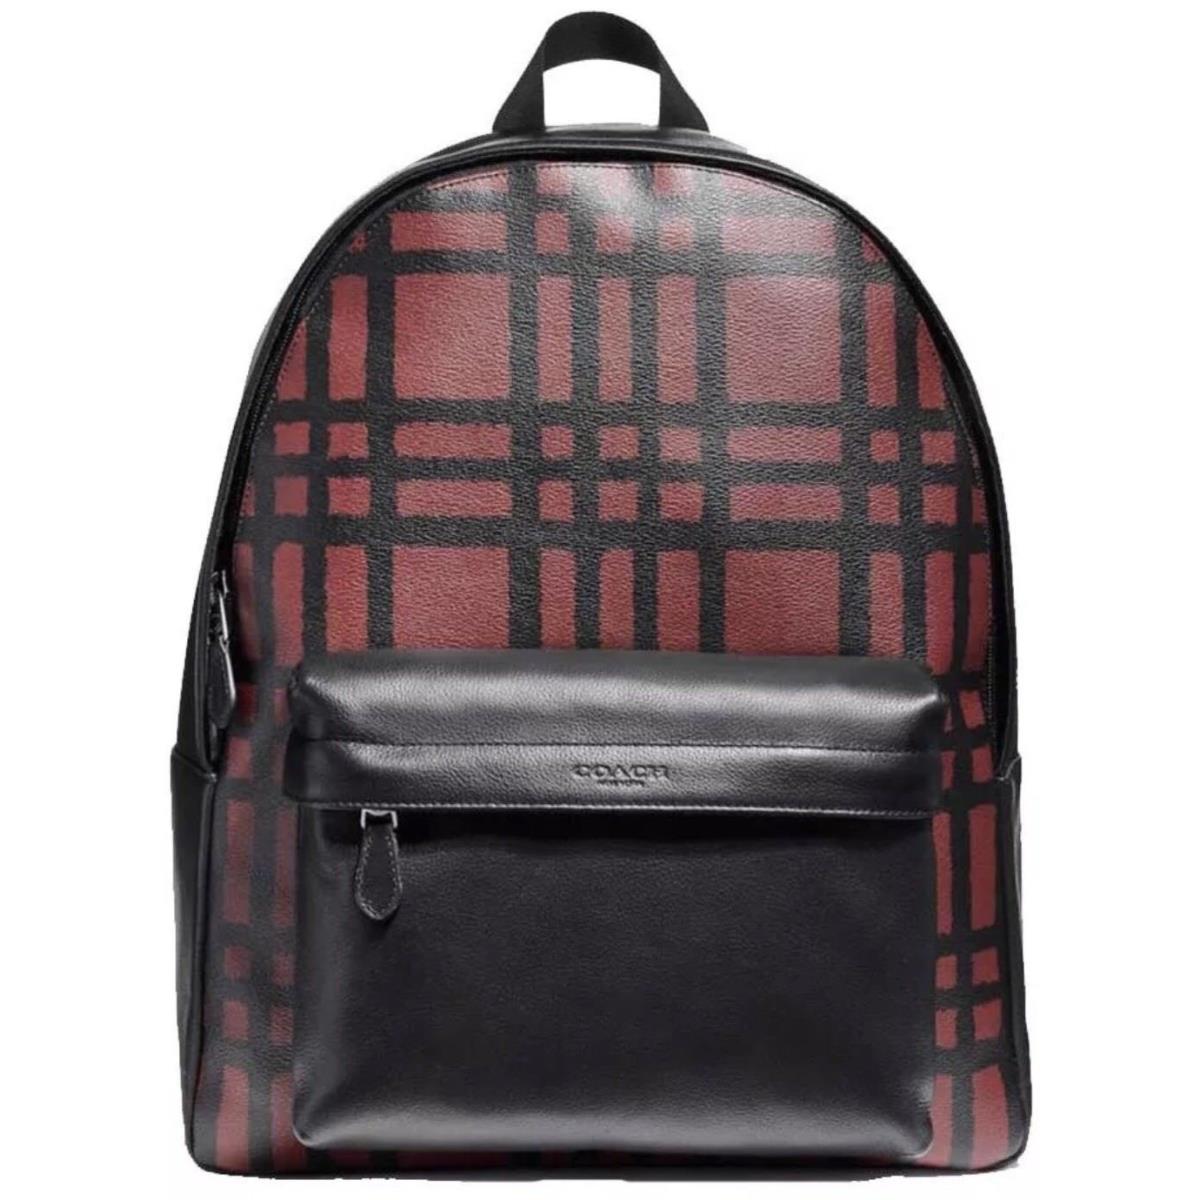 Coach Charles Backpack with Wild Plaid Print Msrp: - black/red